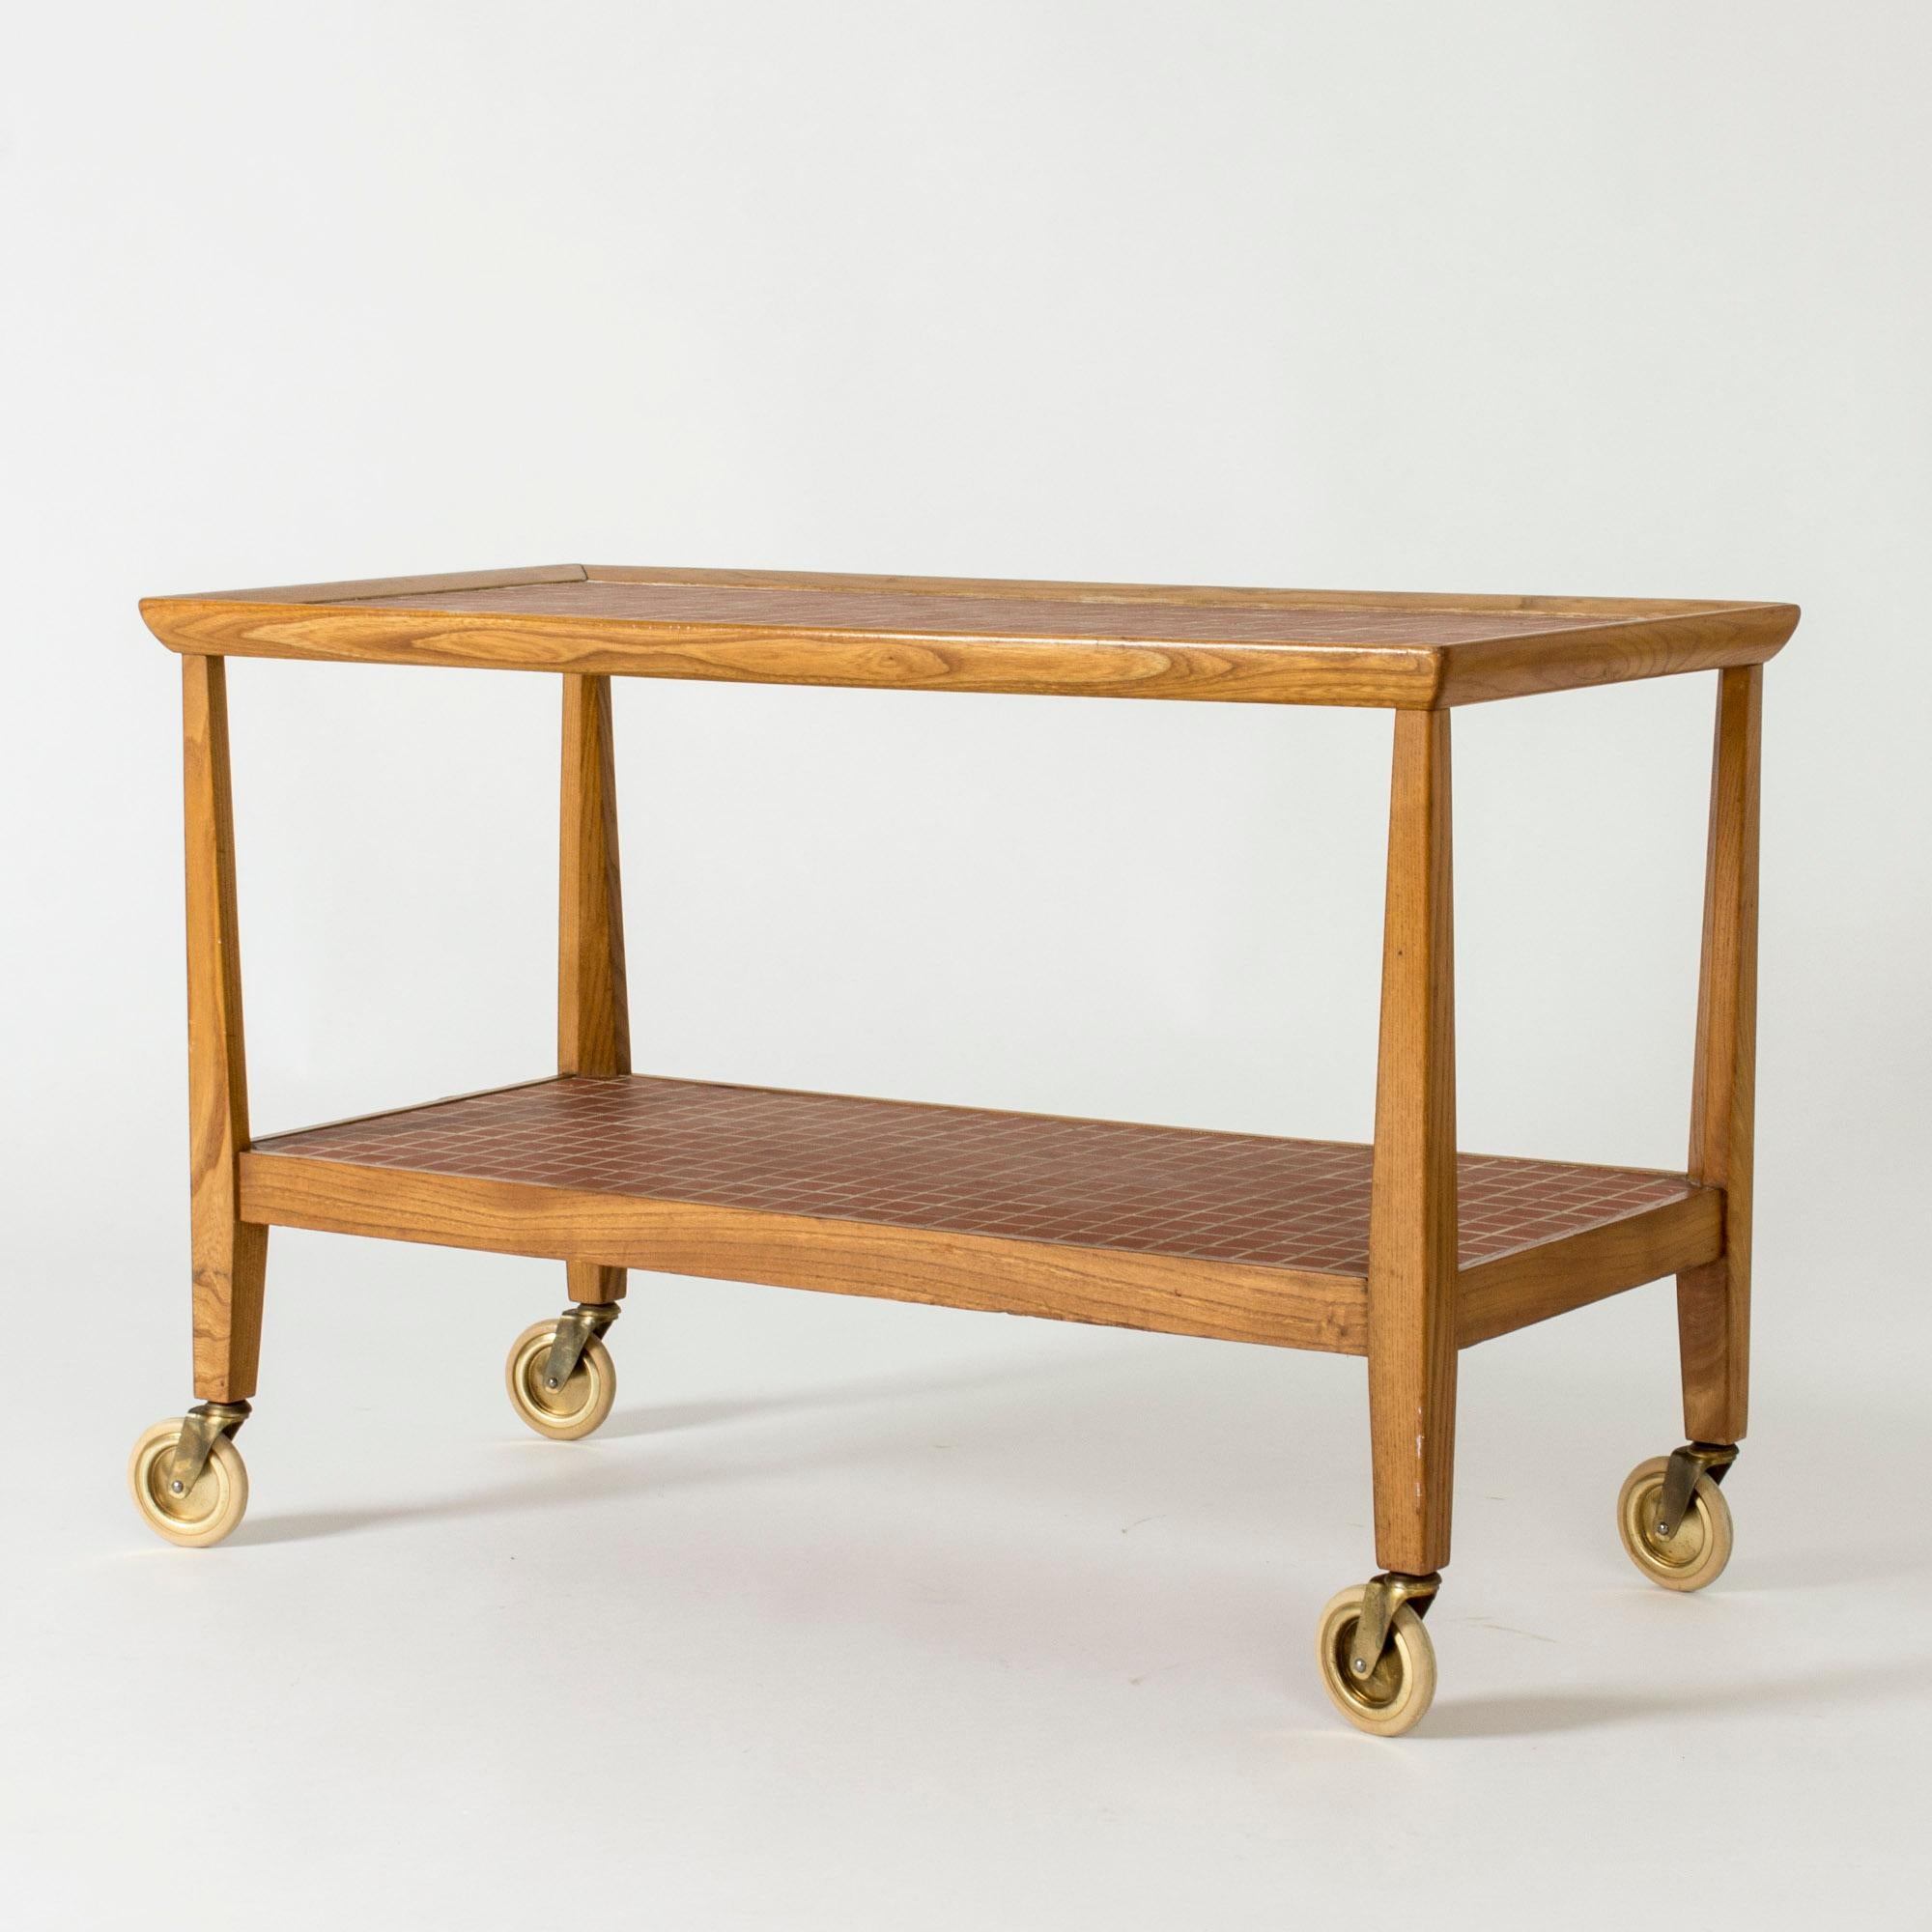 Lovely serving cart or side table by Otto Schulz. Made from mahogany with sleek lines. Table top and shelf with terracotta colored mosaic tiles.